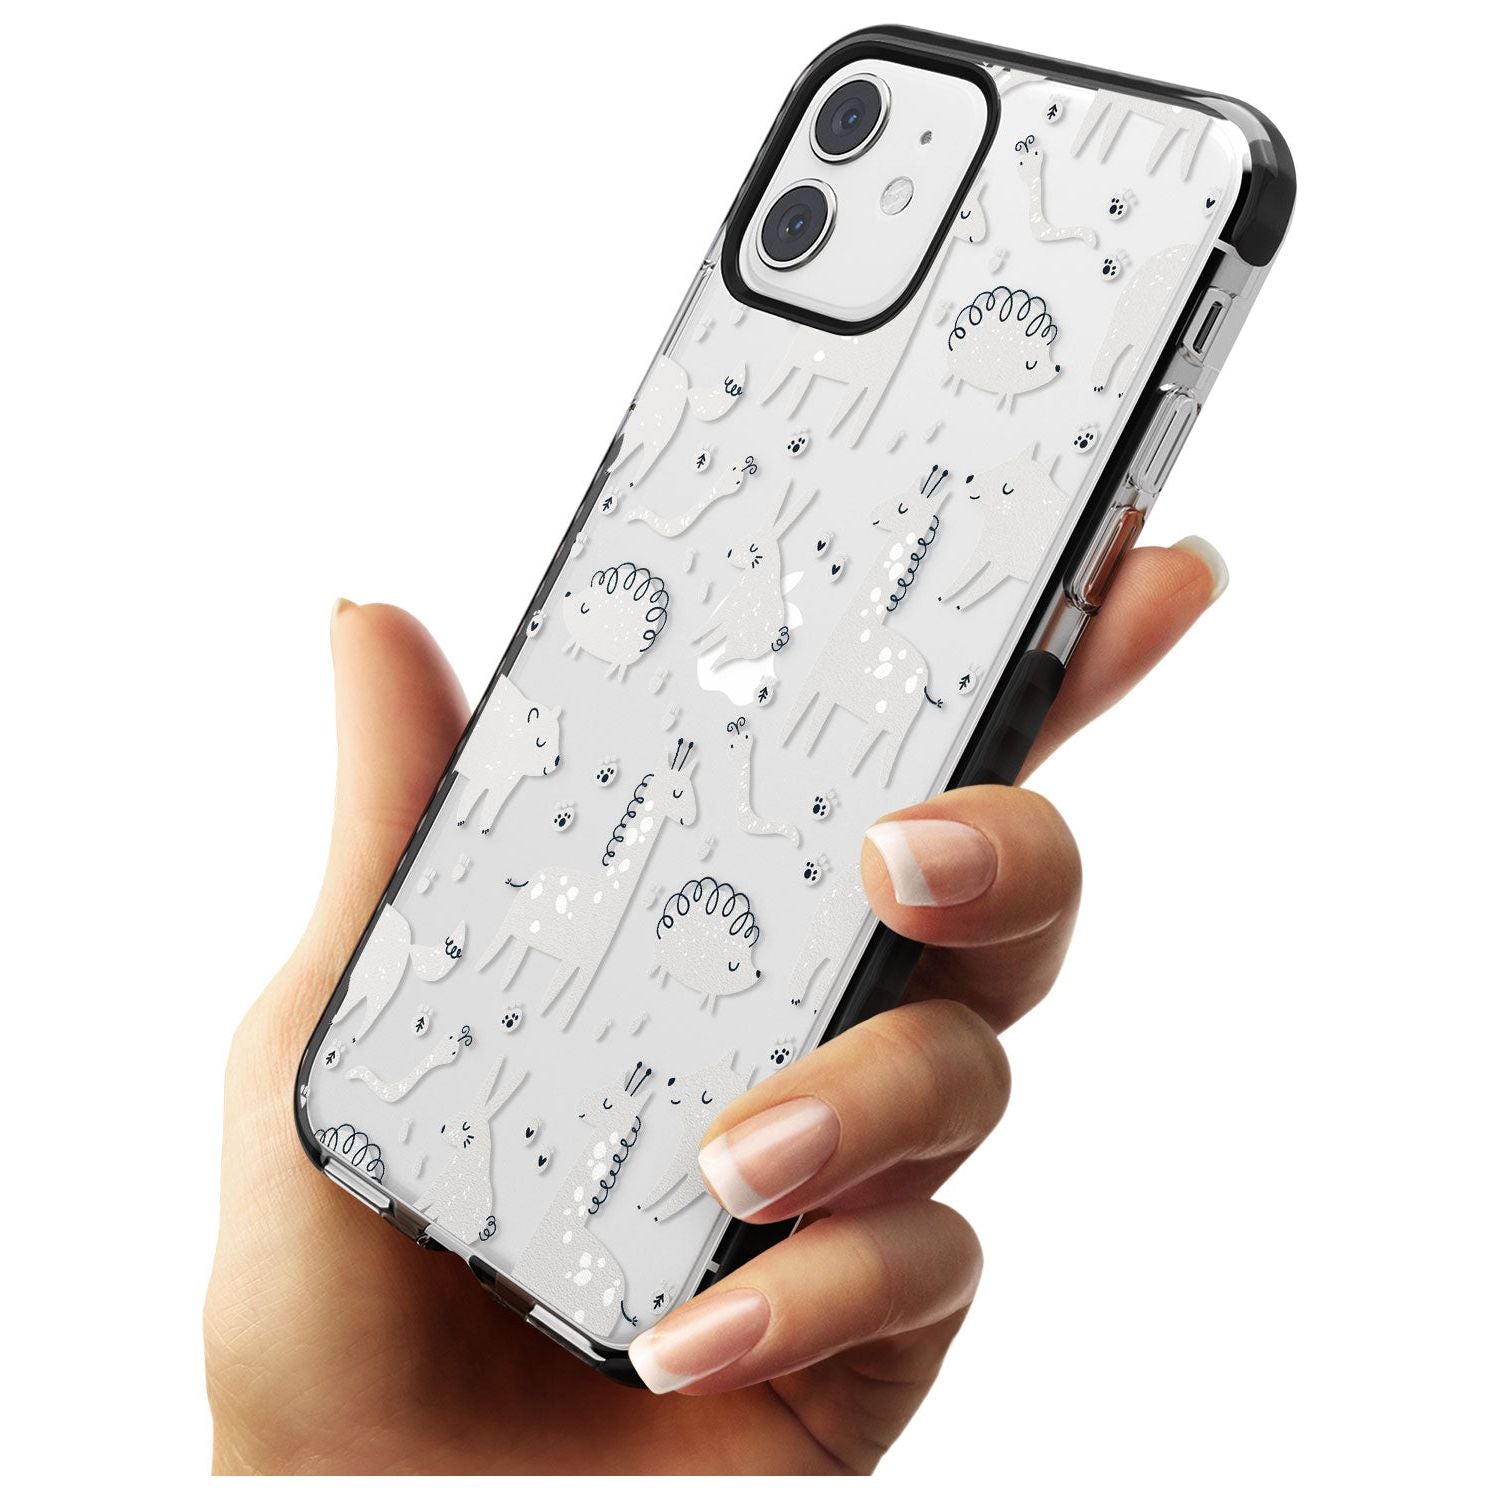 Adorable Mixed Animals Pattern (Clear) Black Impact Phone Case for iPhone 11